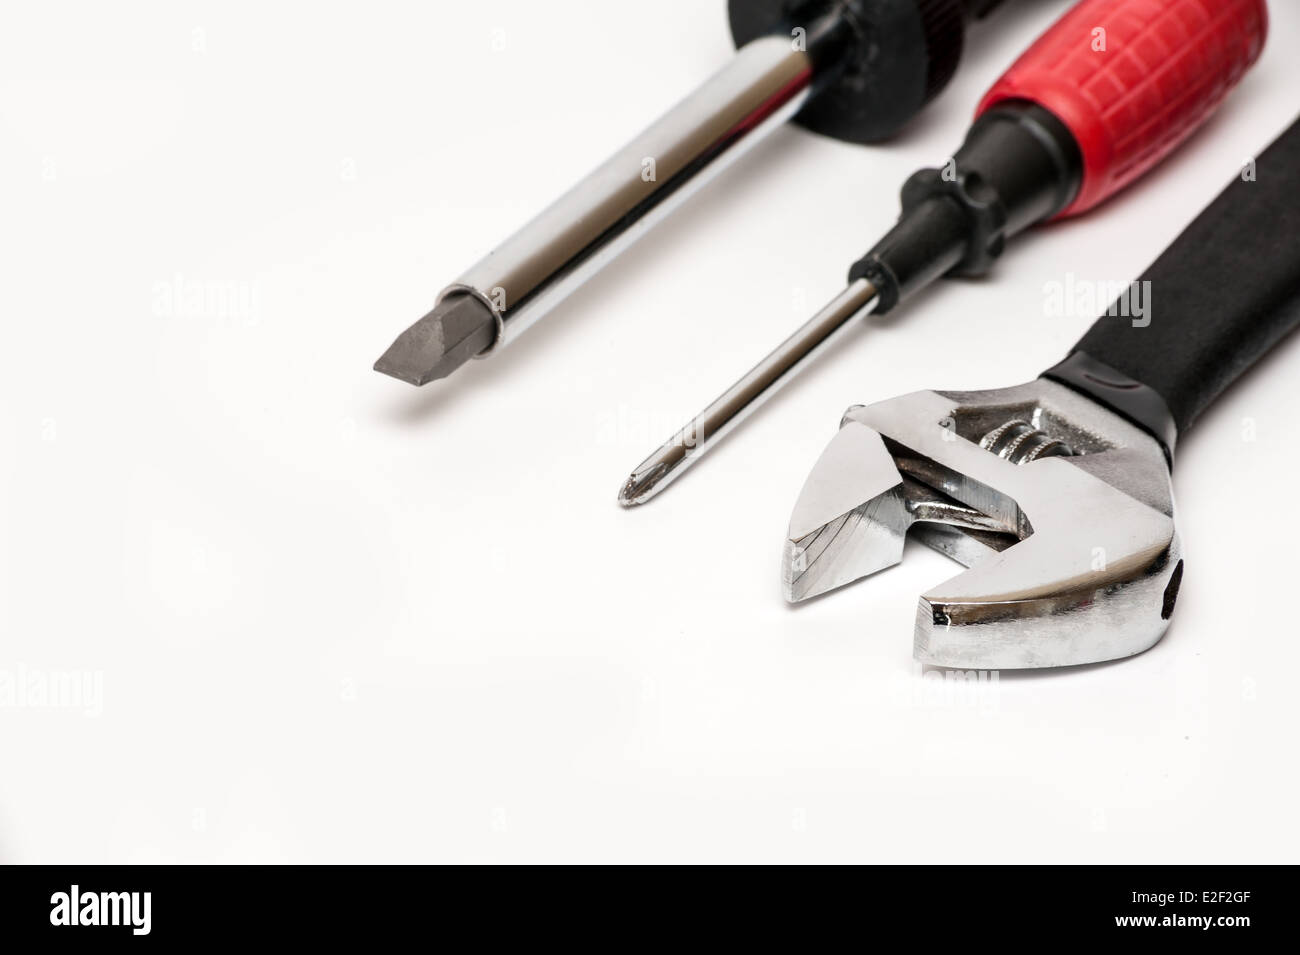 Monkey wrench and screwdriver Stock Photo